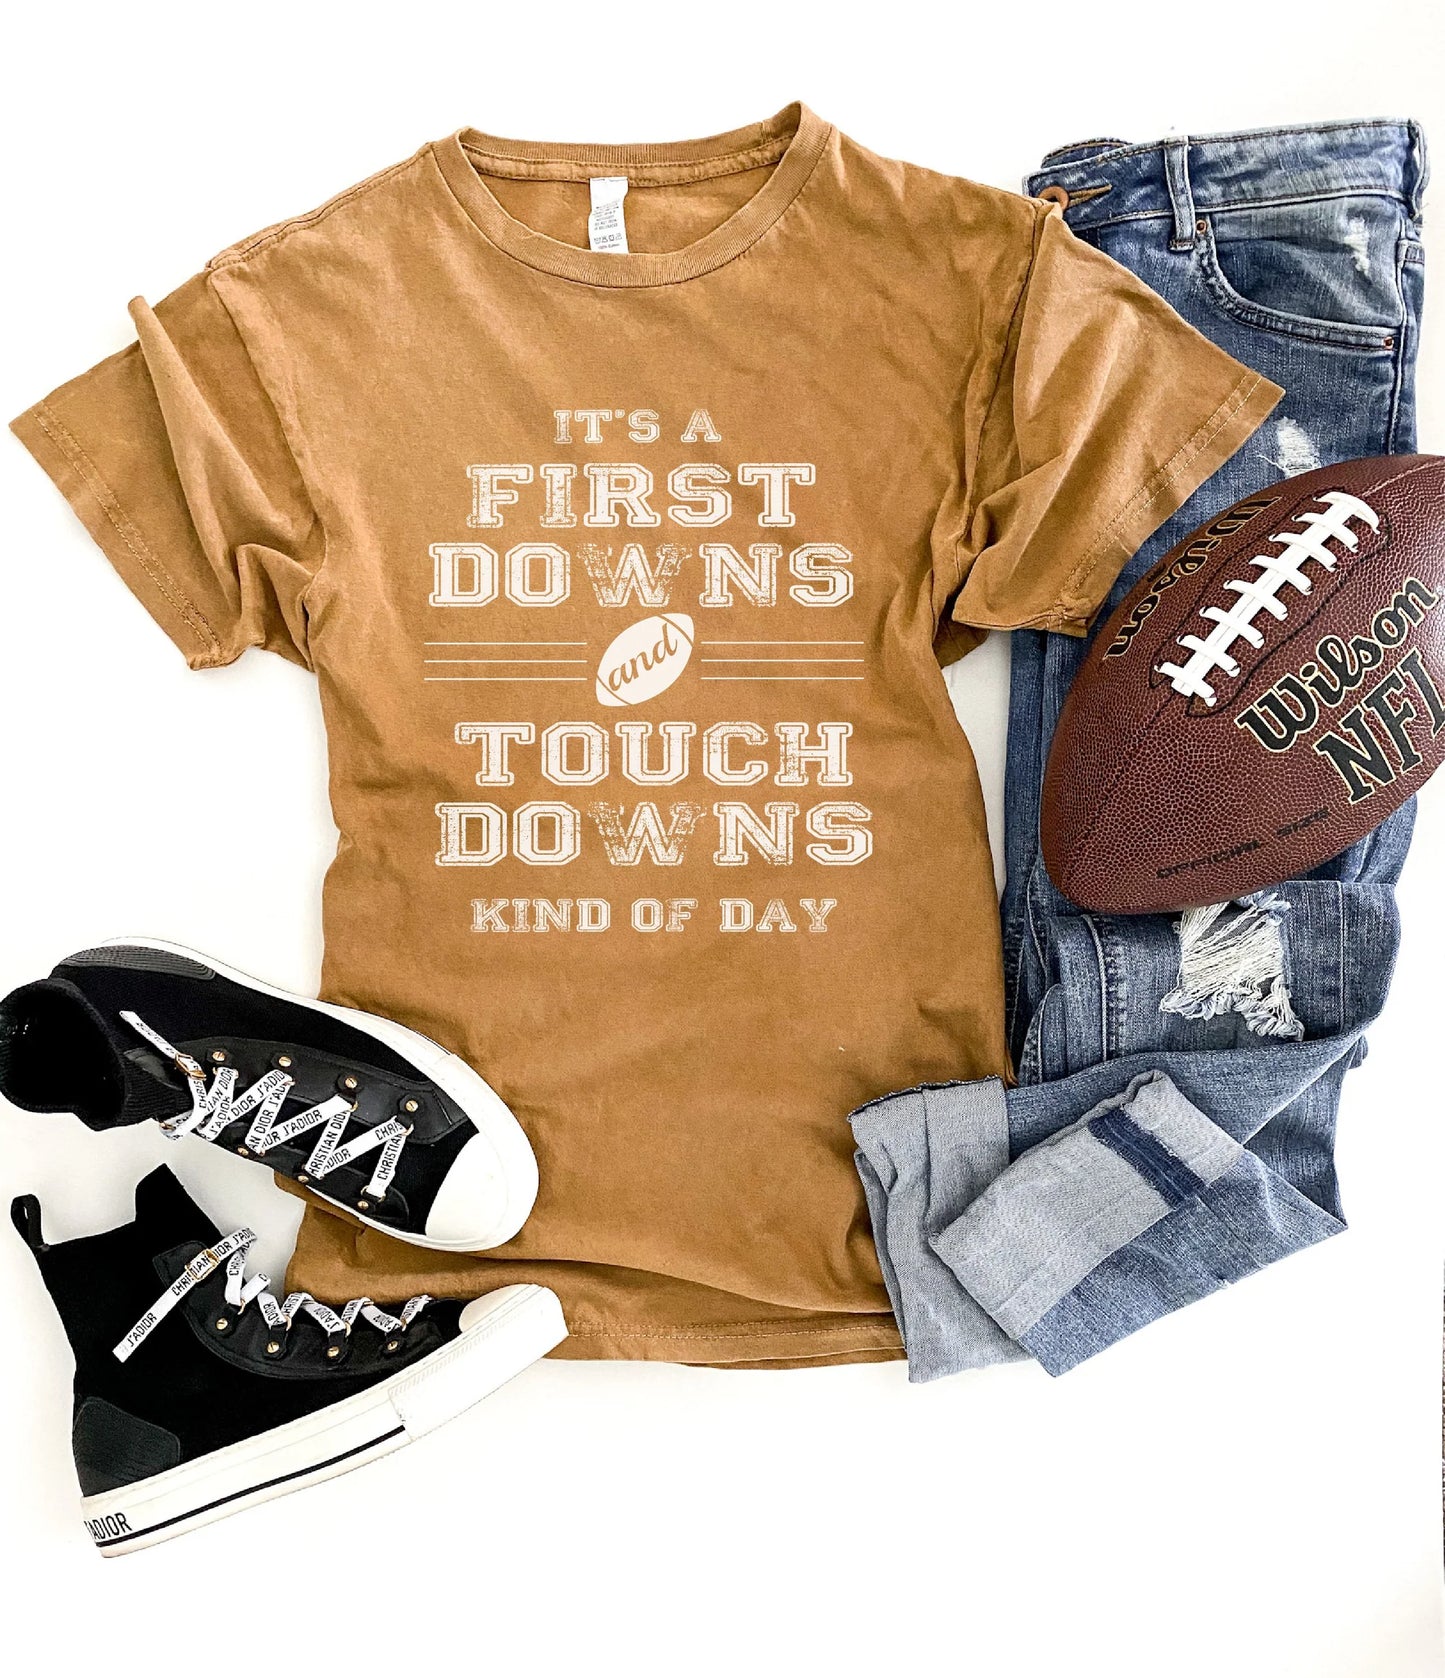 First Downs & Touch Downs Vintage Wash Tee